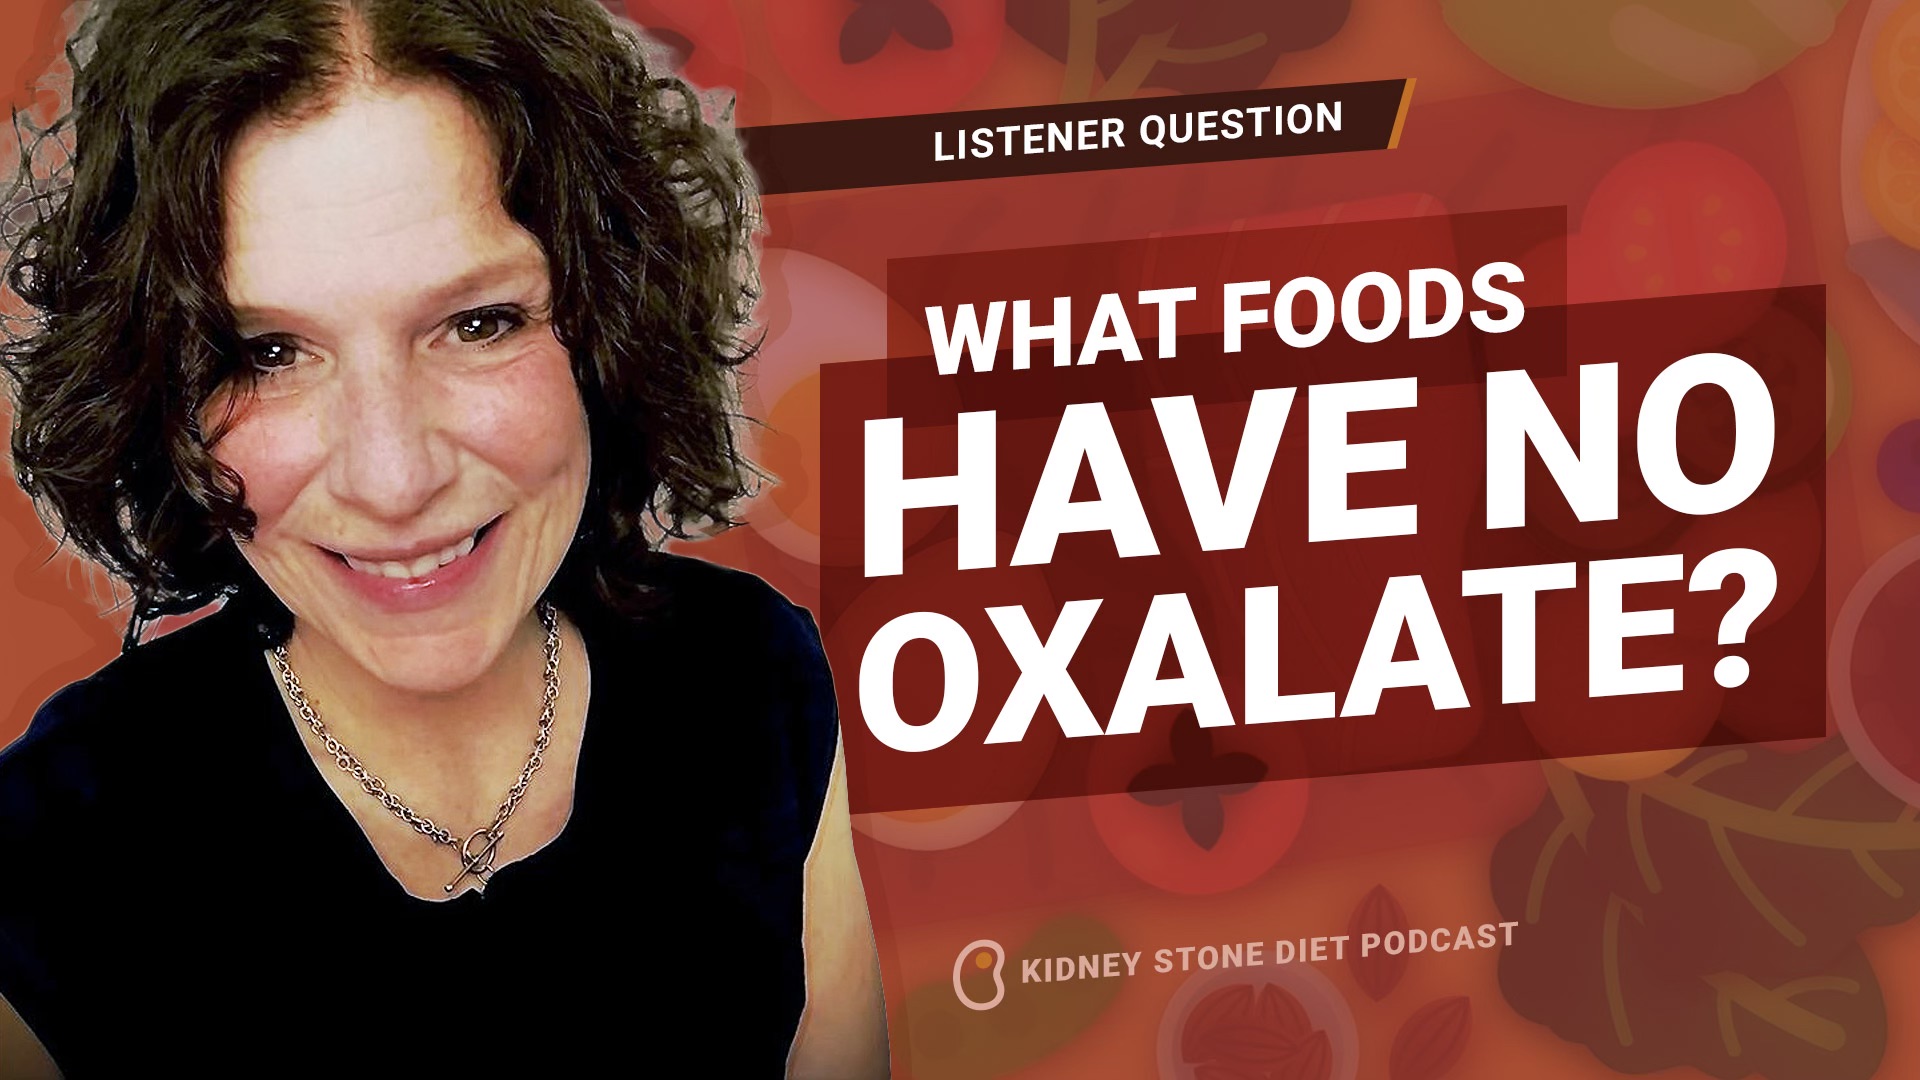 What foods have no oxalate?